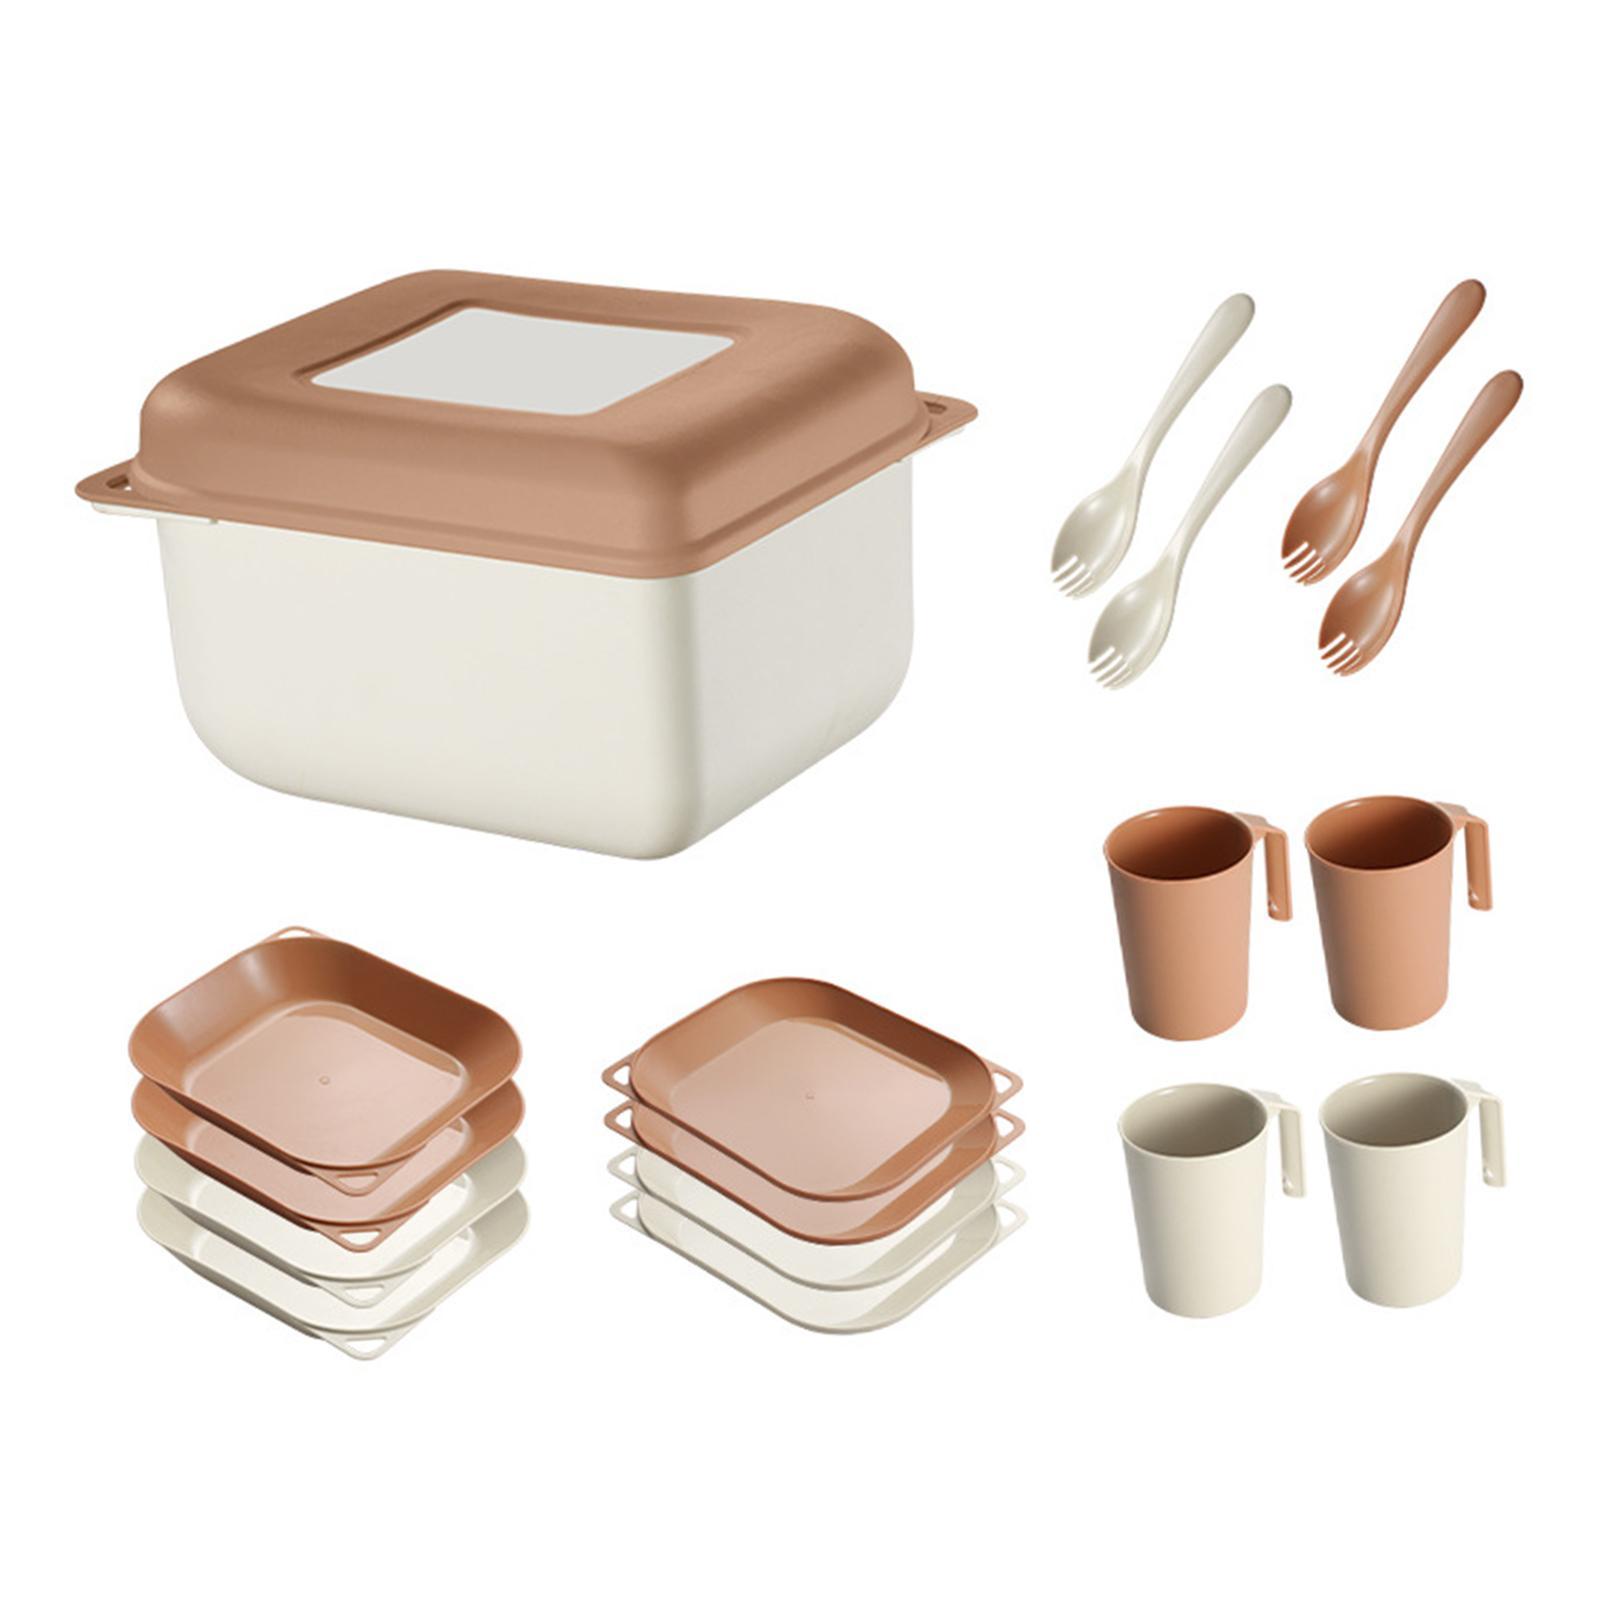 Wheat Straw Dinnerware Sets Box Outdoor Cutlery Set for Party Kitchen Picnic